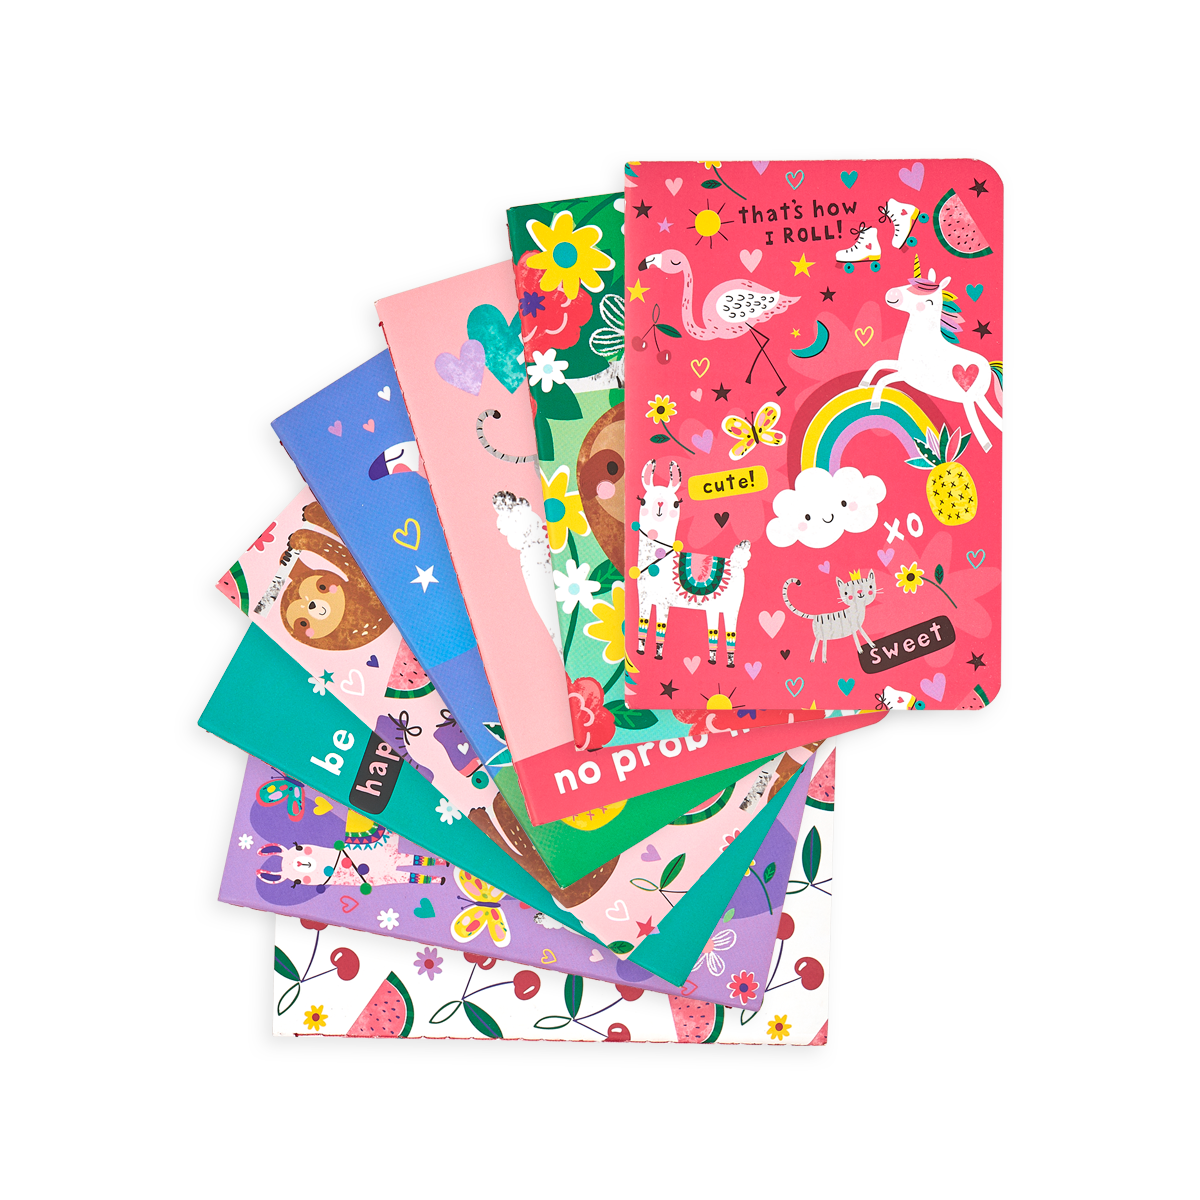 Funtastic Friends Pocket Pal Journals spanned out